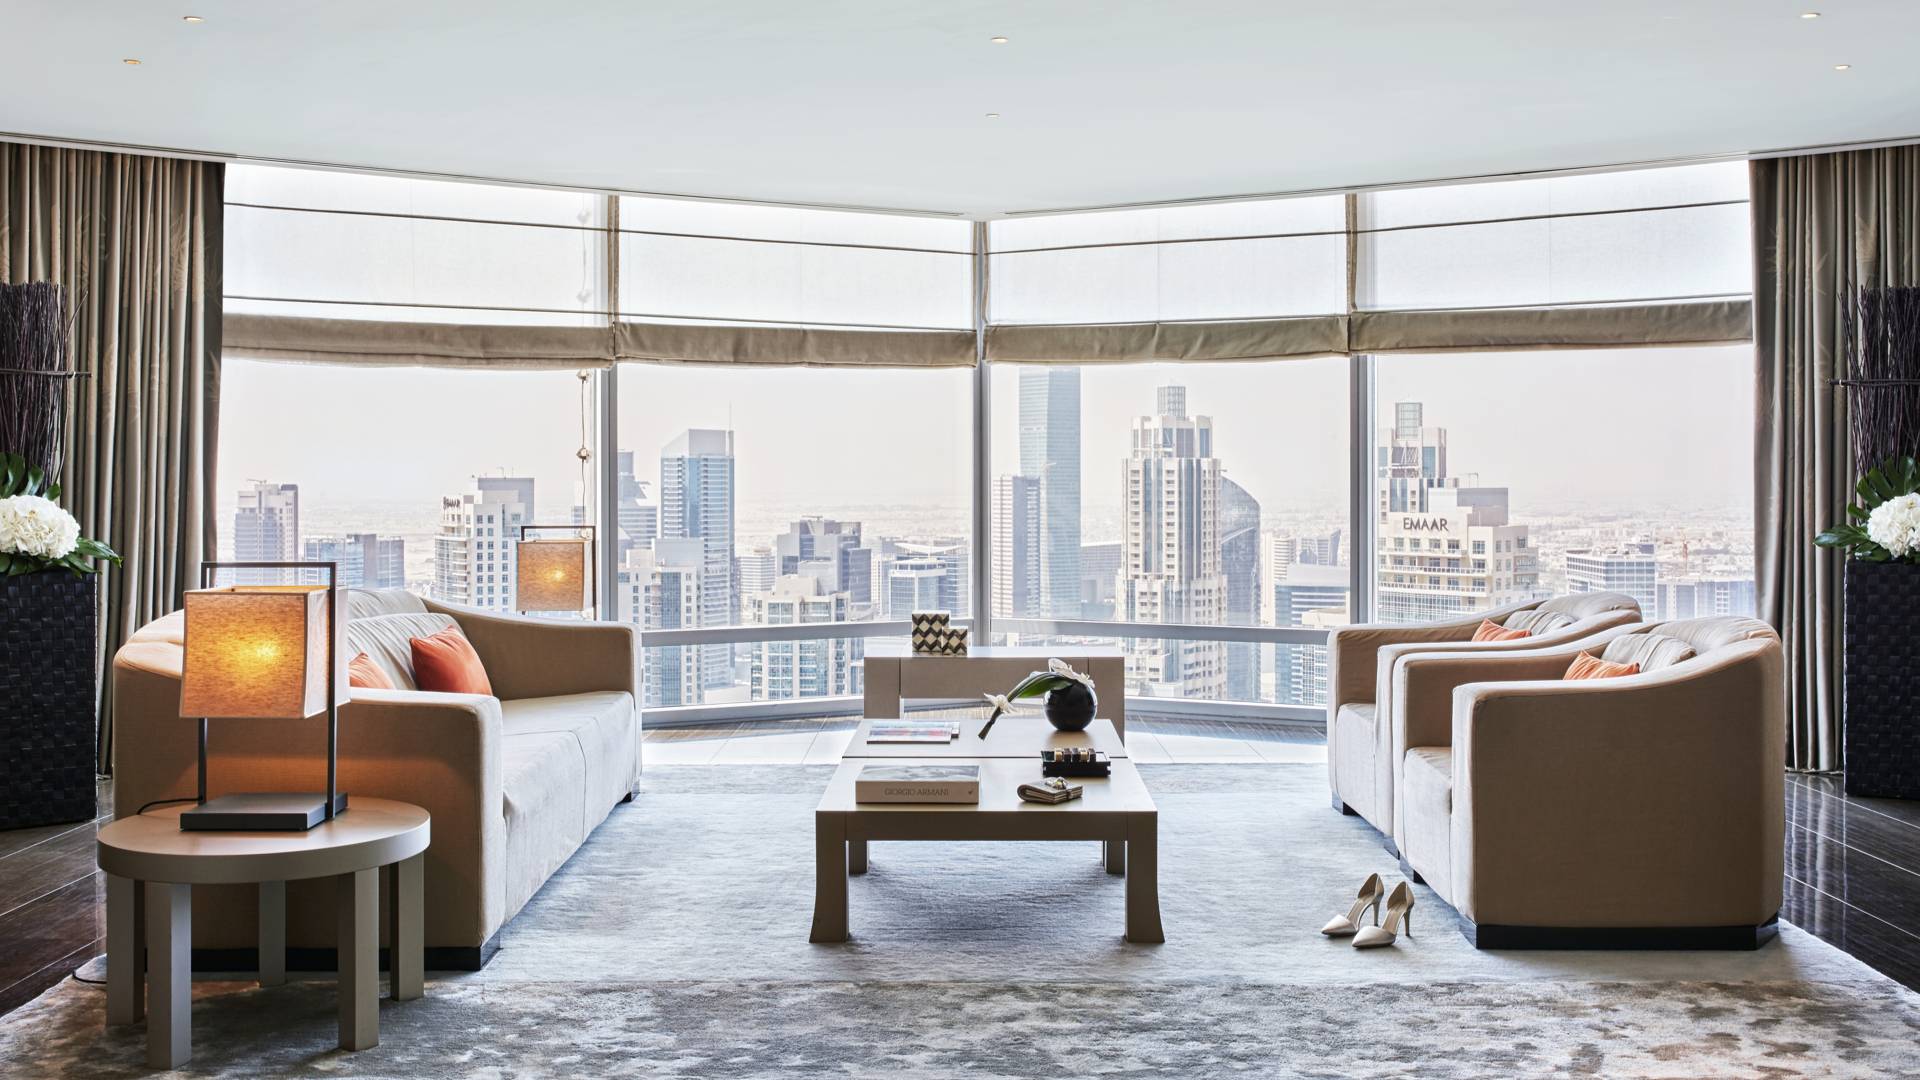 The hotel's signature Armani Signature Suites on the 38th and 39th floor are chic in design, with uninterrupted views of the city. (Photo: Armani Hotel Dubai)